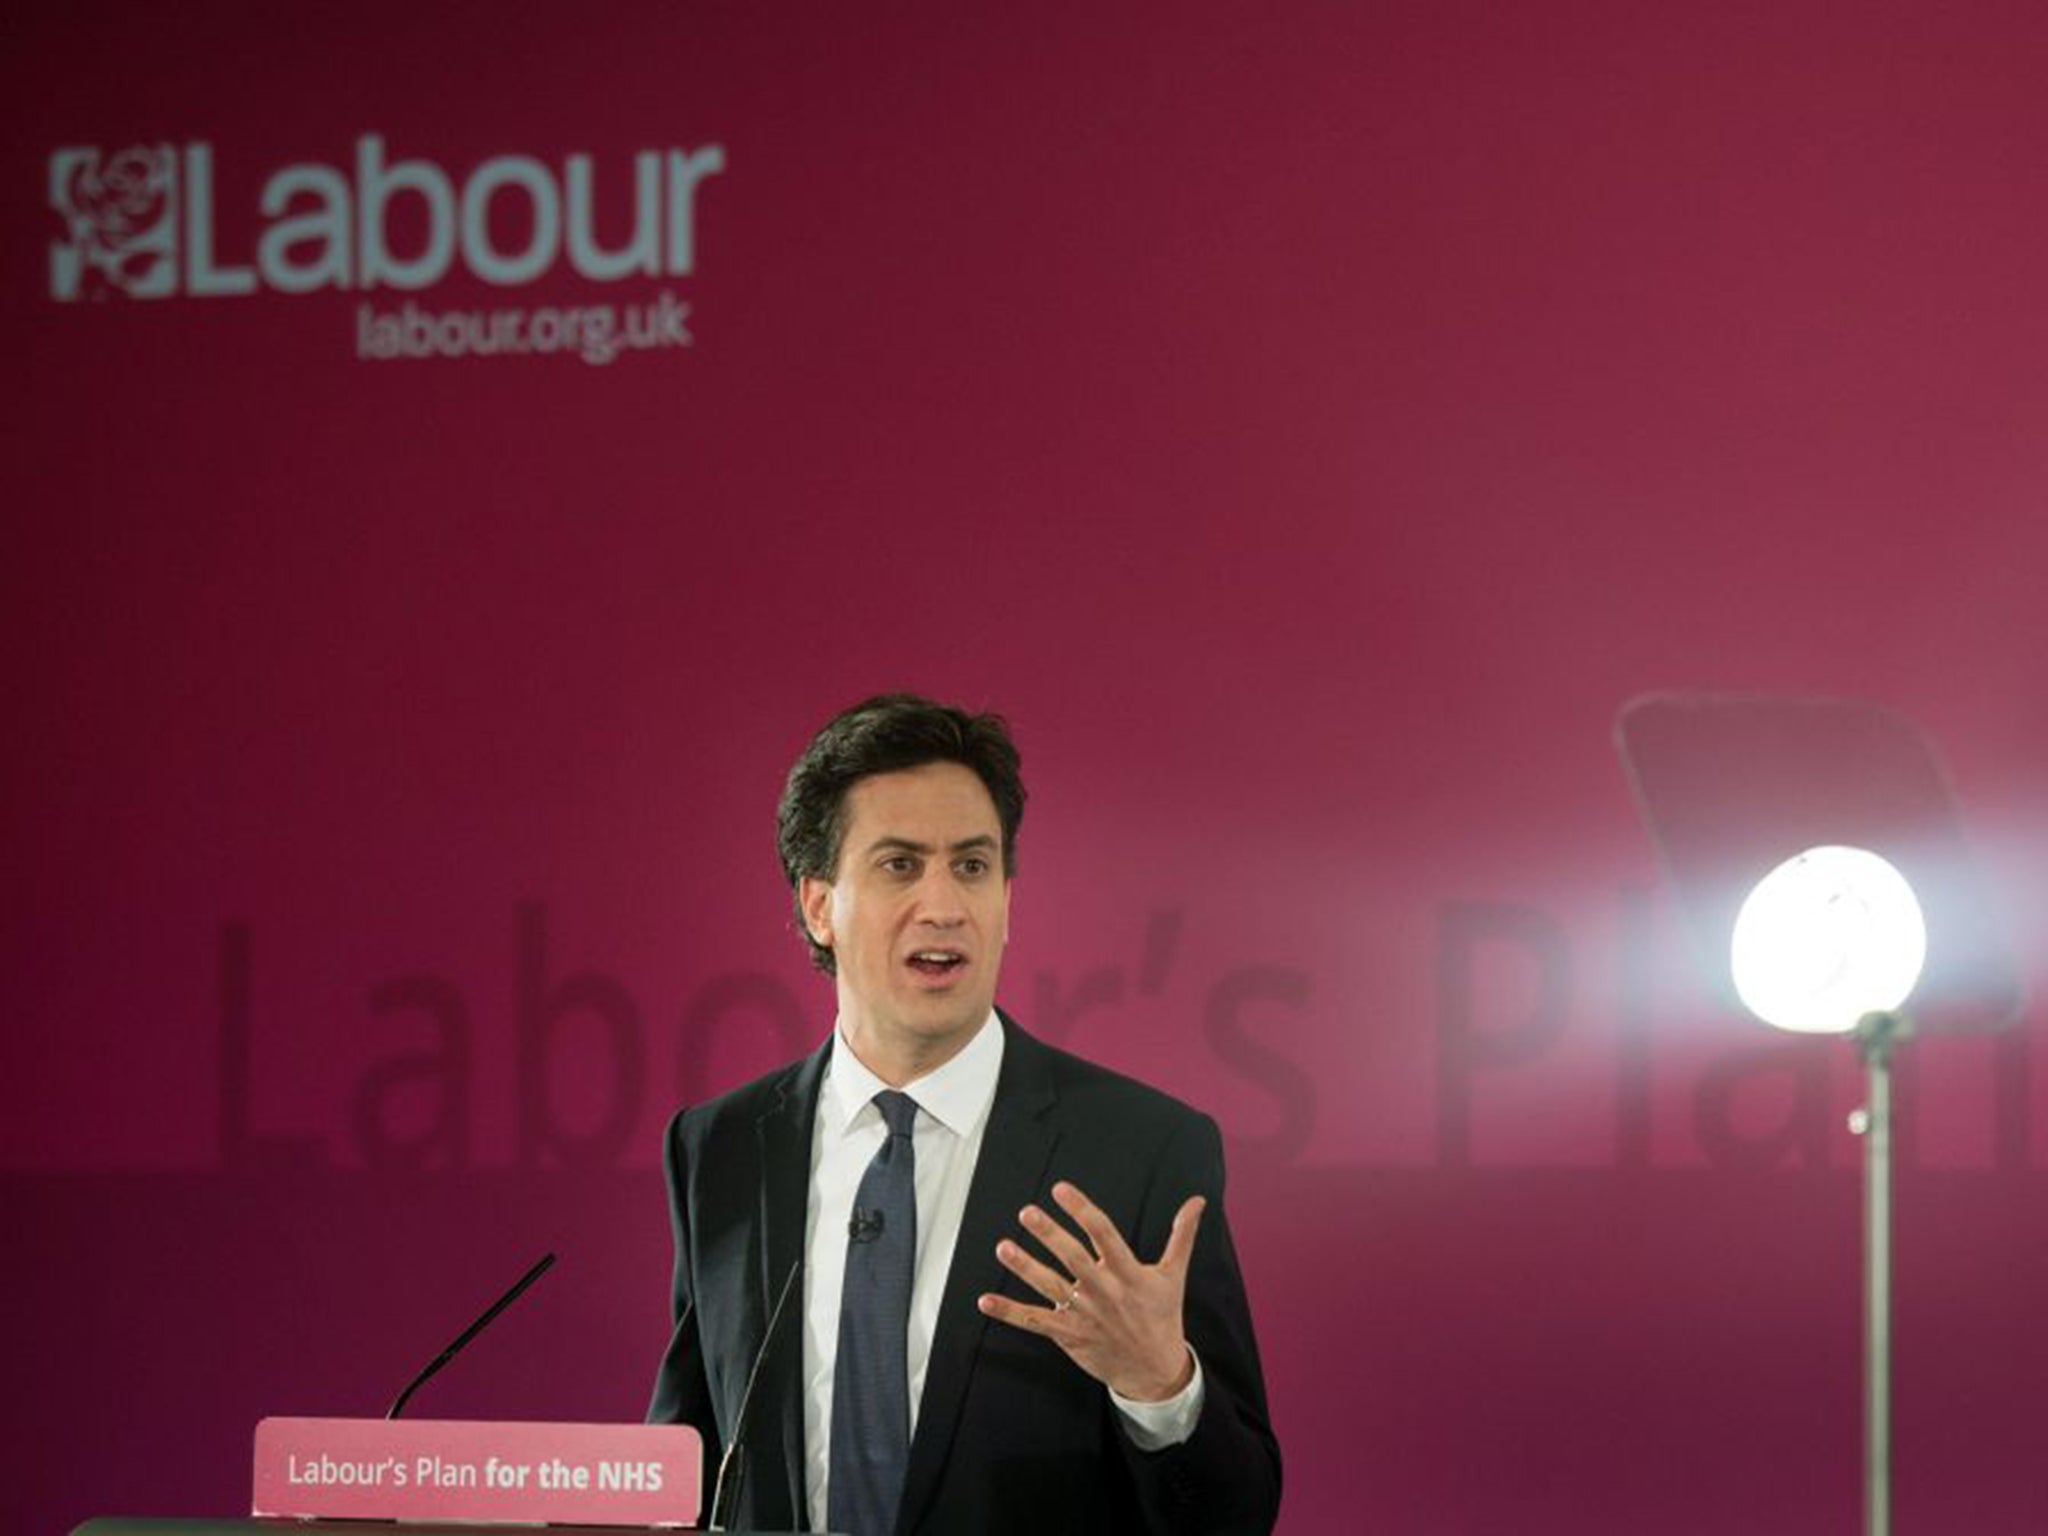 Ed Miliband has claimed that one million people have gone missing from the electoral register